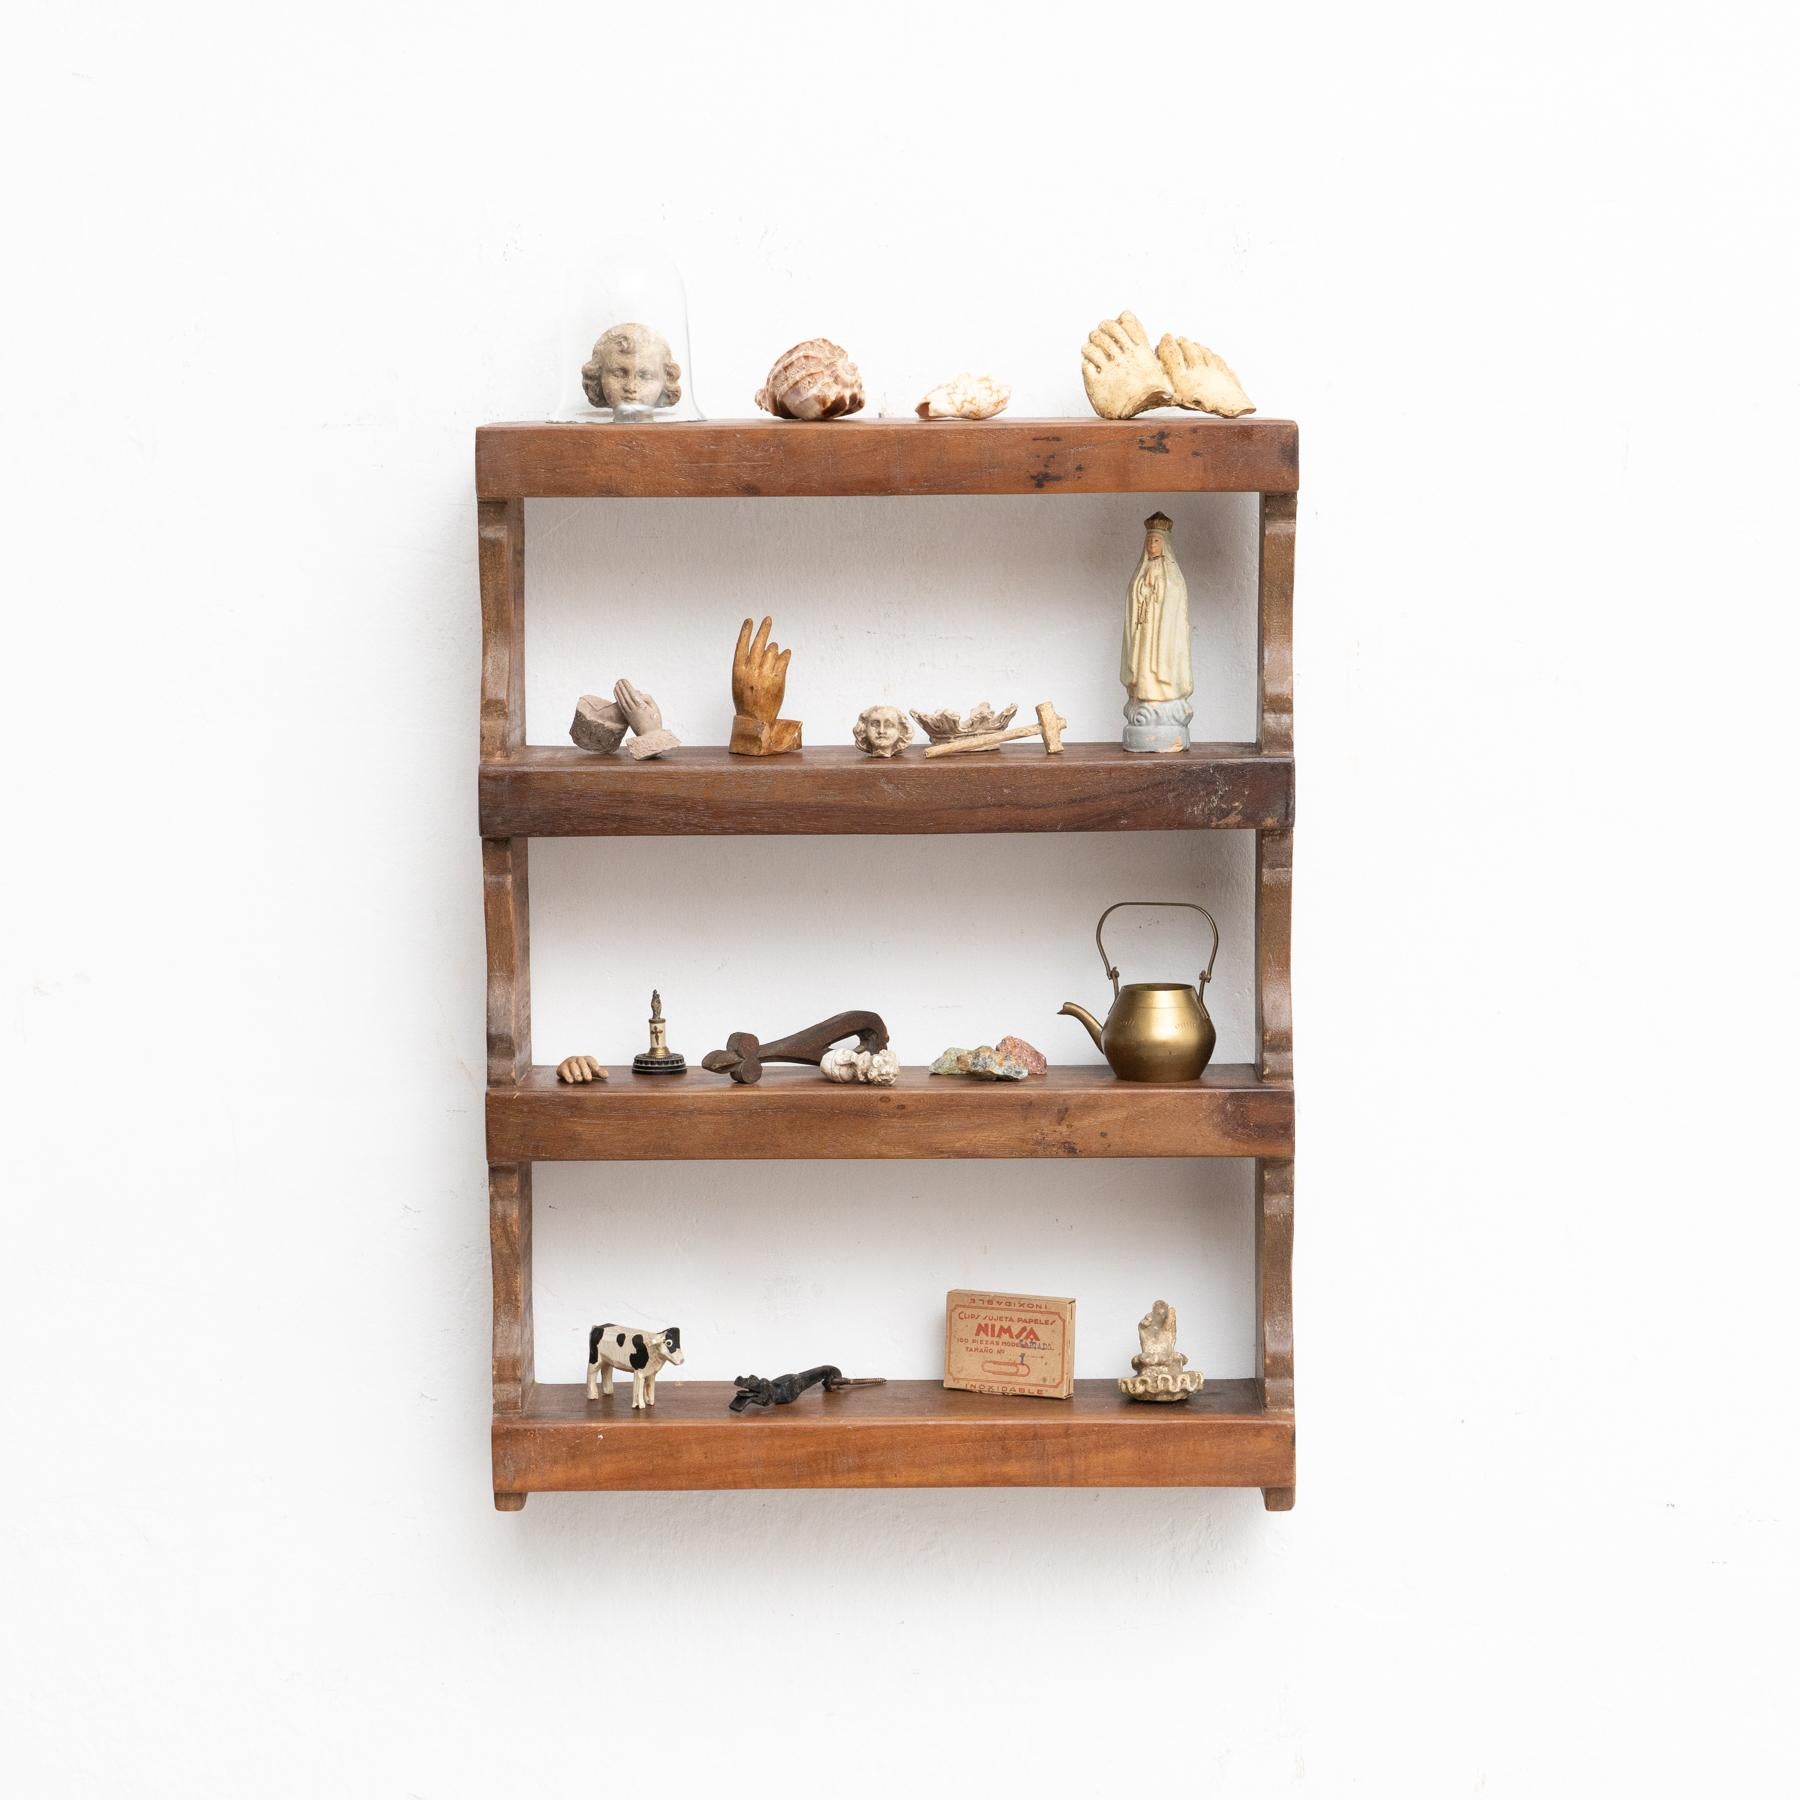 Cabinet of curiosities of plaster figures and pieces in a wooden shelve.

Made in Spain, circa 1950.

In original condition, with minor wear consistent with age and use, preserving a beautiful patina.

Materials:
Plaster.
Wood

The